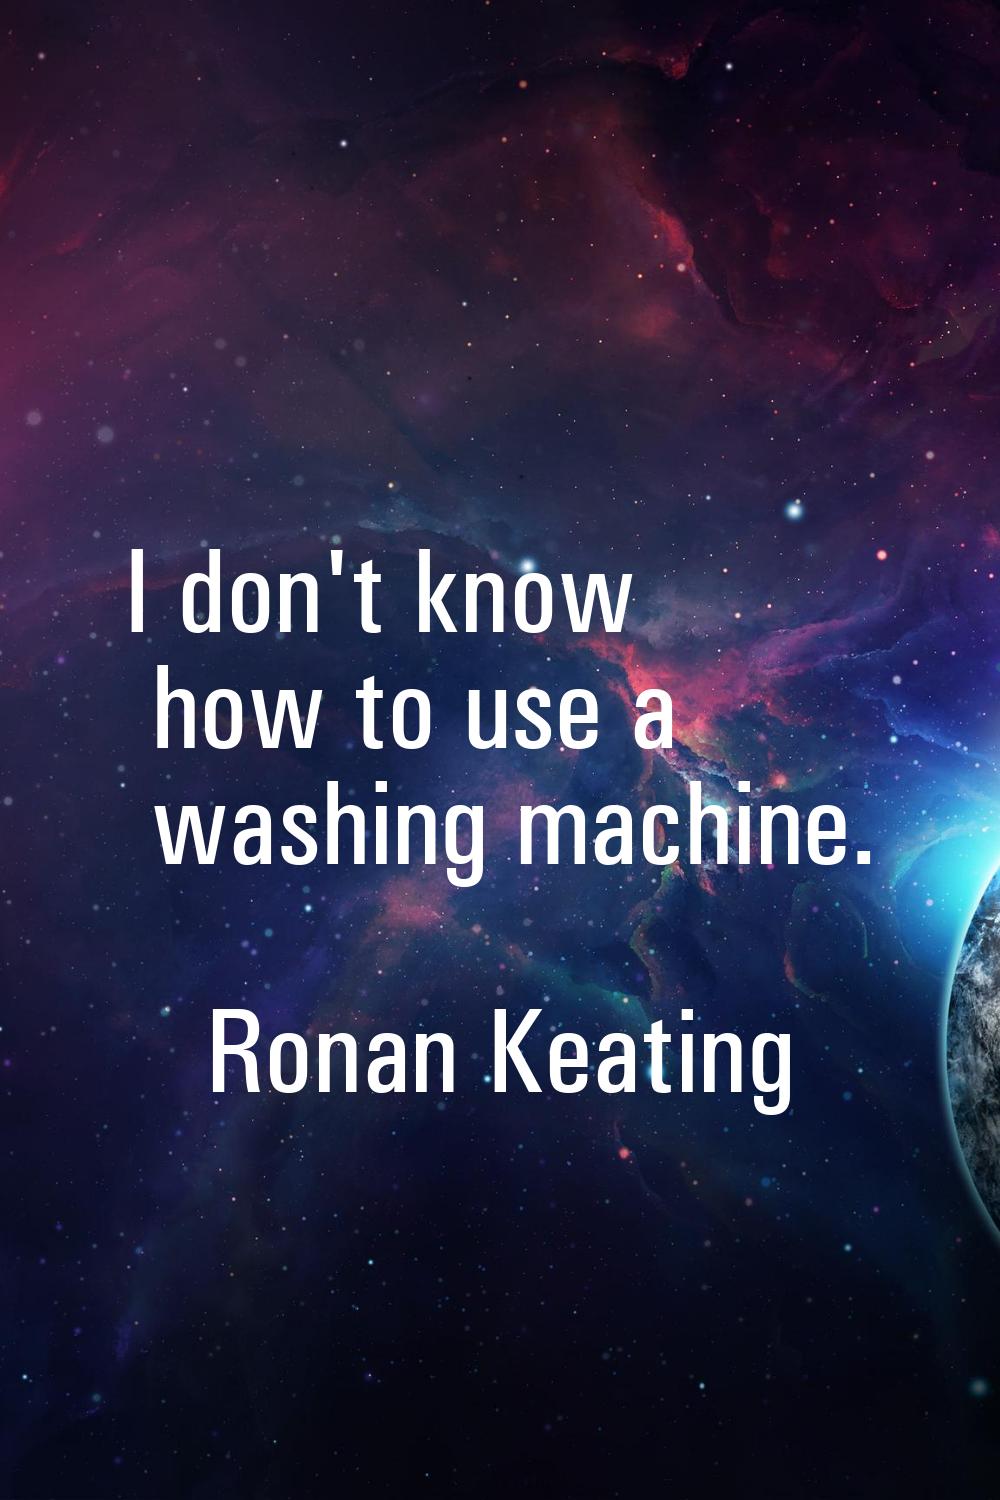 I don't know how to use a washing machine.